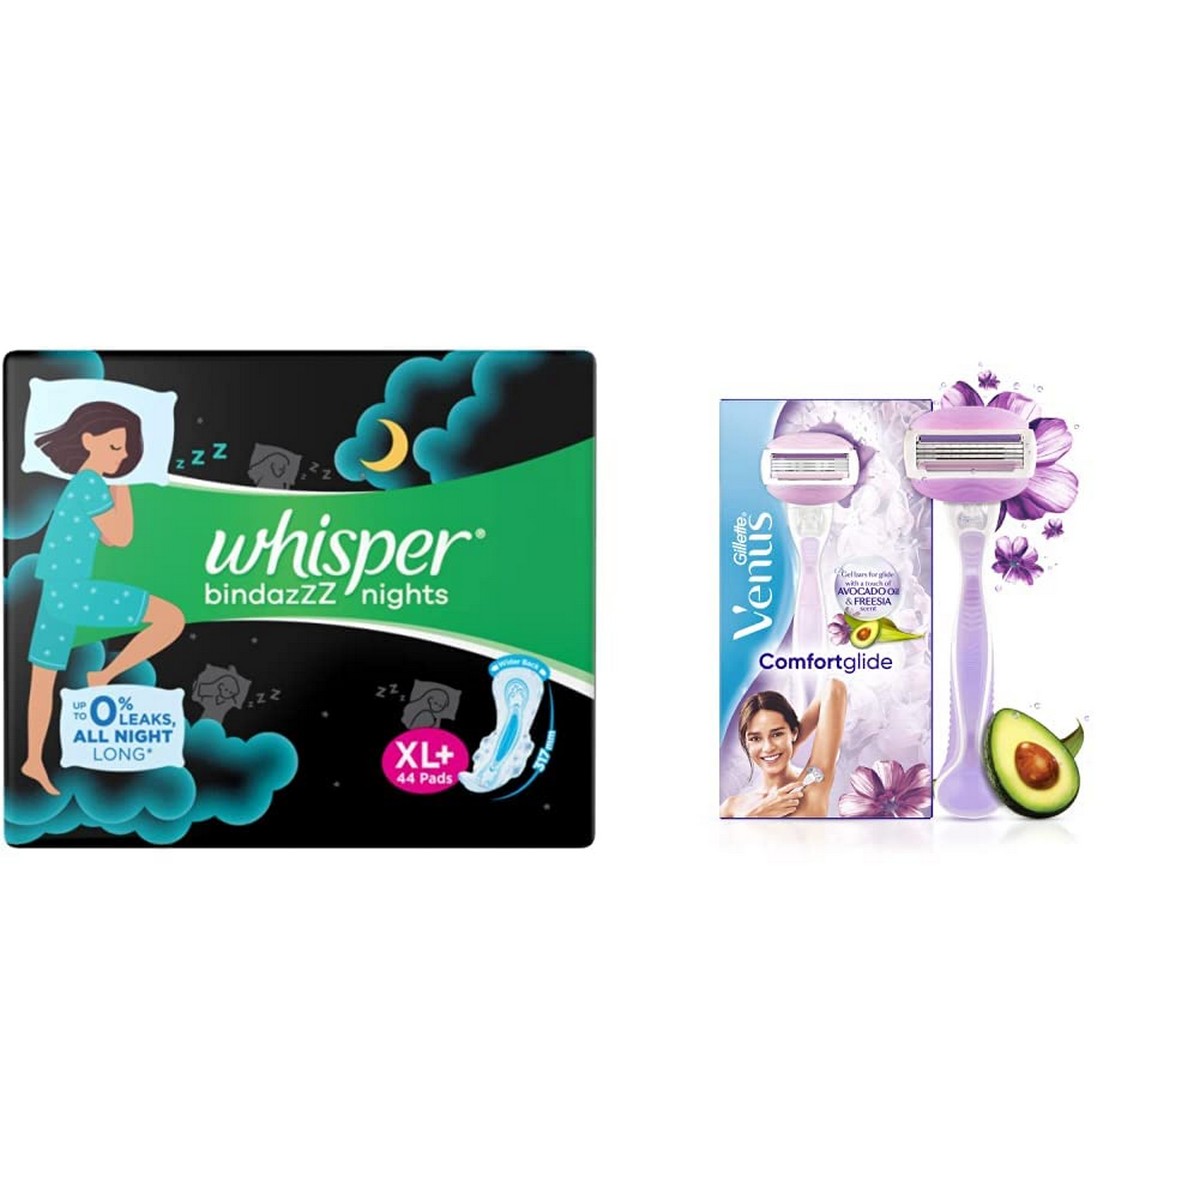 Whisper Ultra Night Sanitary PadS Xl+ 44 Napkins And Gillette Venus Breeze Hair  Removal Razor For Women - RichesM Healthcare